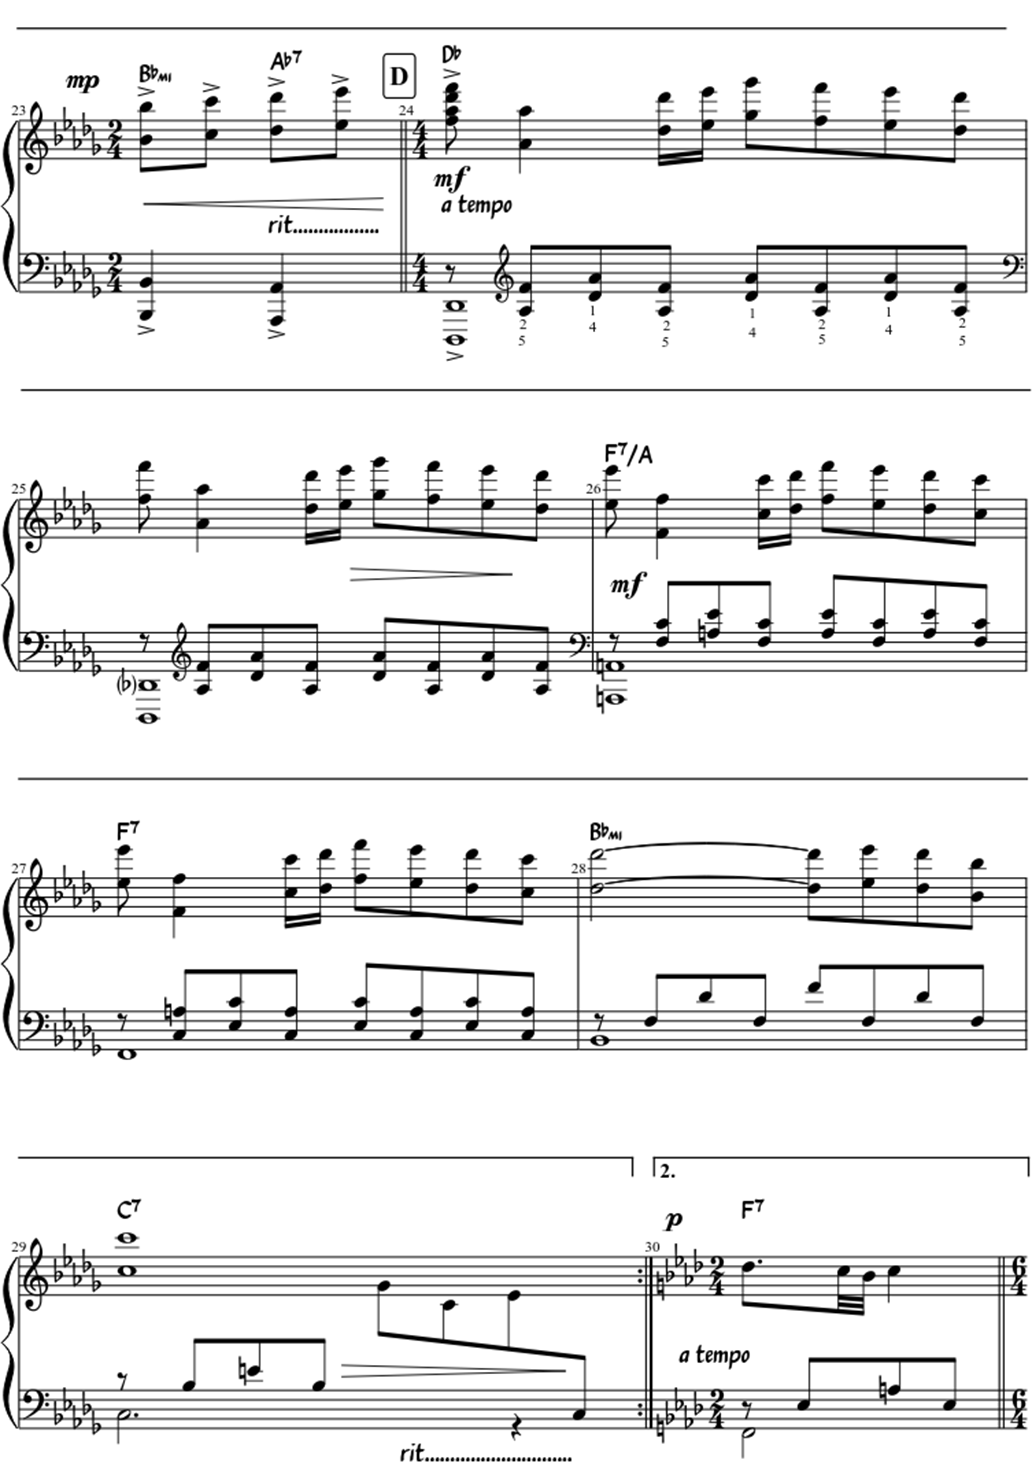 A comme amour sheet music notes 3